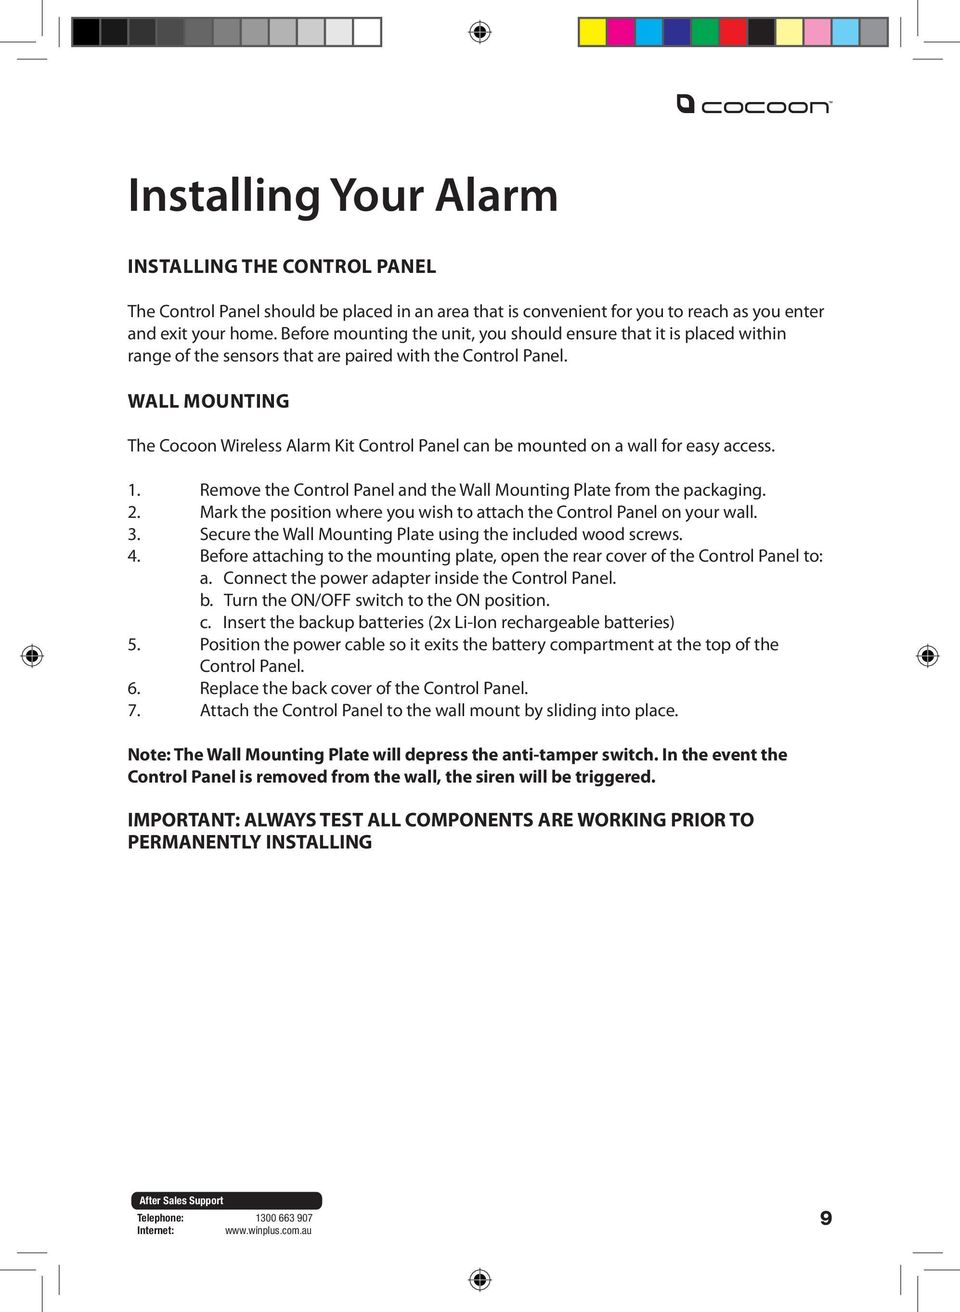 Wall Mounting The Cocoon Wireless Alarm Kit Control Panel can be mounted on a wall for easy access. 1. Remove the Control Panel and the Wall Mounting Plate from the packaging. 2.